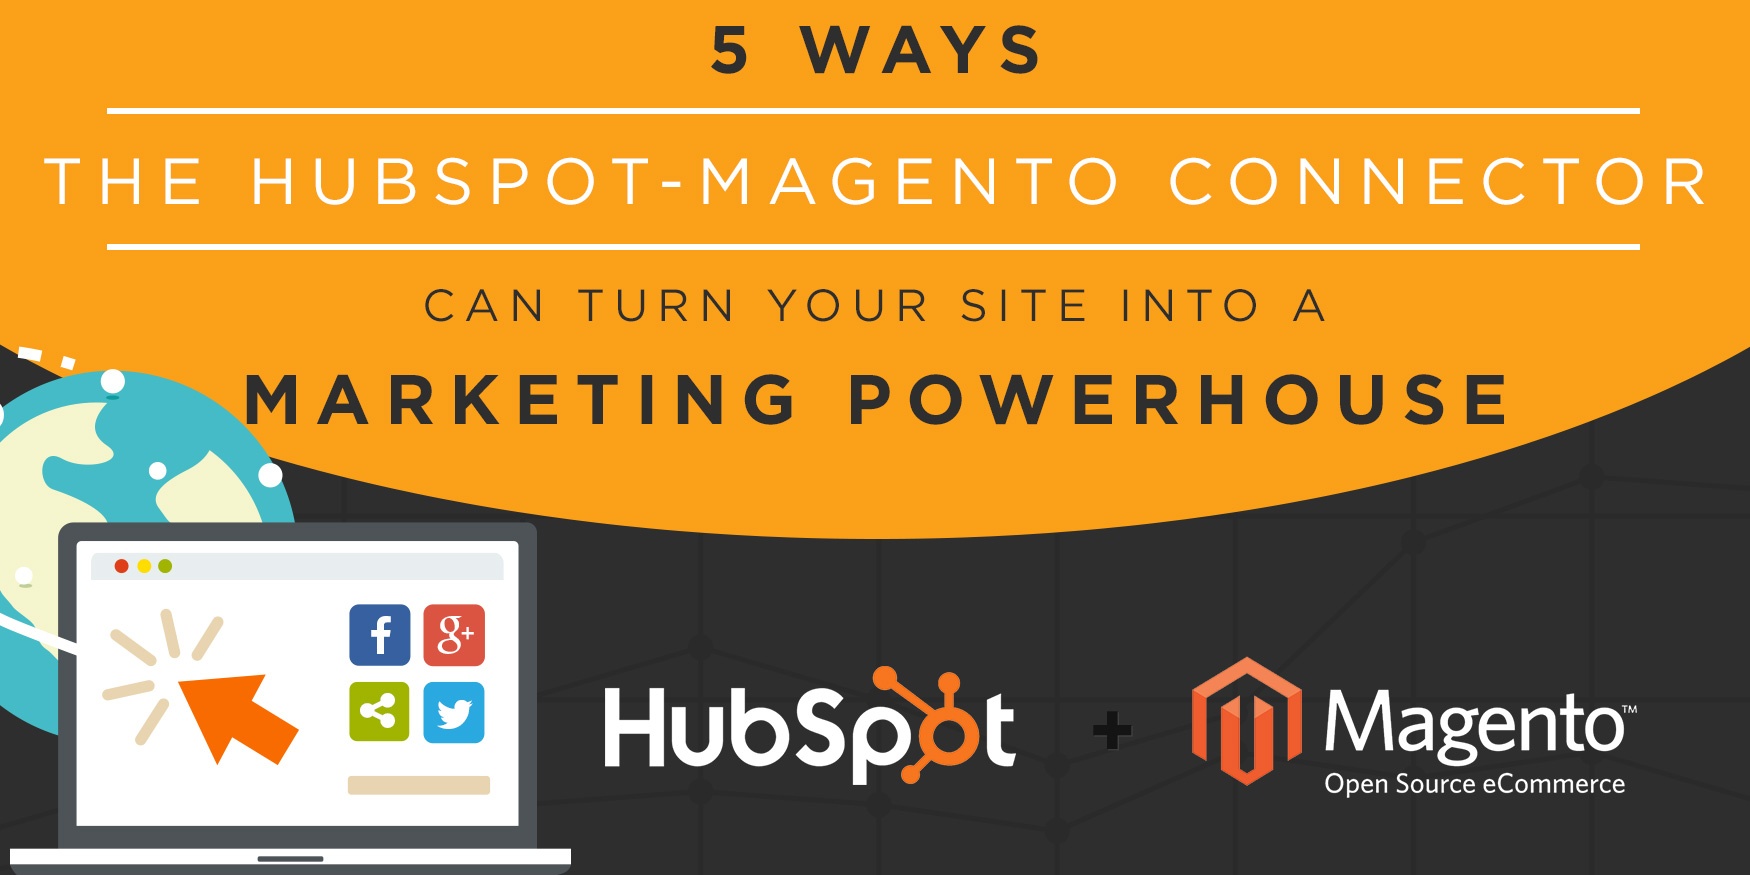 5 Ways The HubSpot-Magento Connector Can Turn your Site Into a Marketing Powerhouse